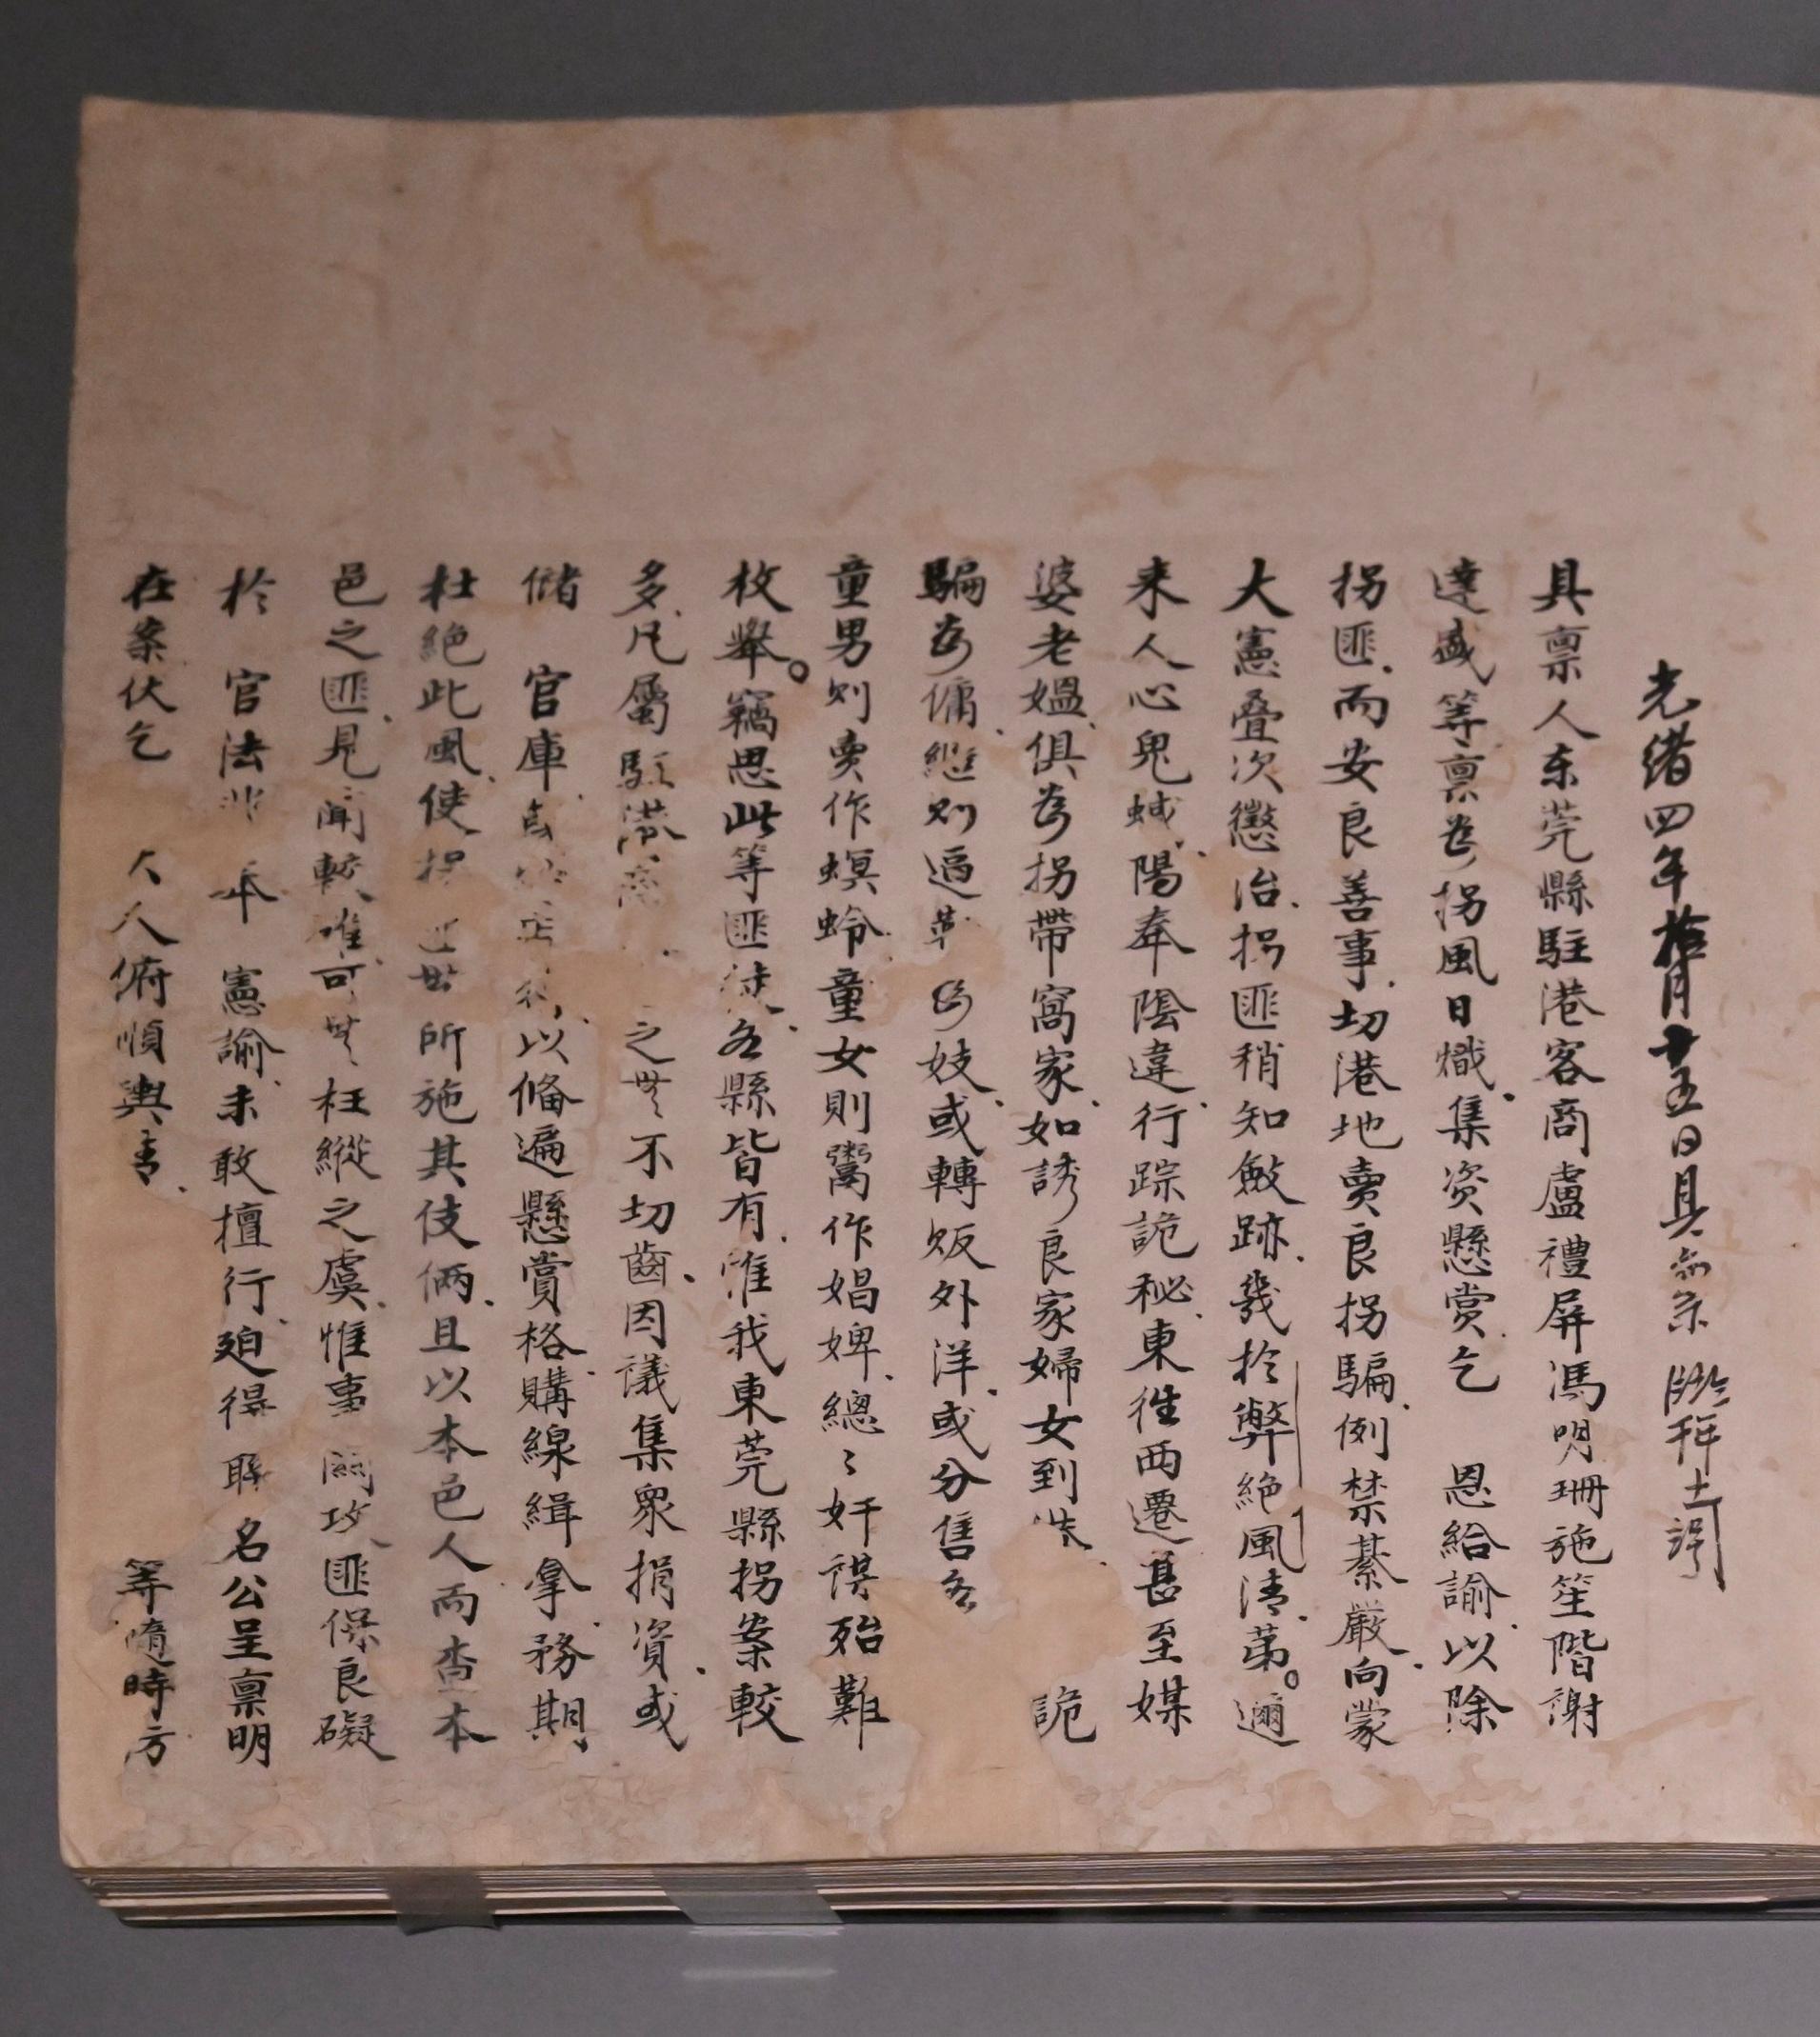 The opening ceremony for the exhibition "Po Leung Kuk 145th Anniversary: Building Charity with Benevolence" was held today (October 17) at the Hong Kong Heritage Museum. Photo shows "The Petition", the earliest record kept by Po Leung Kuk.
